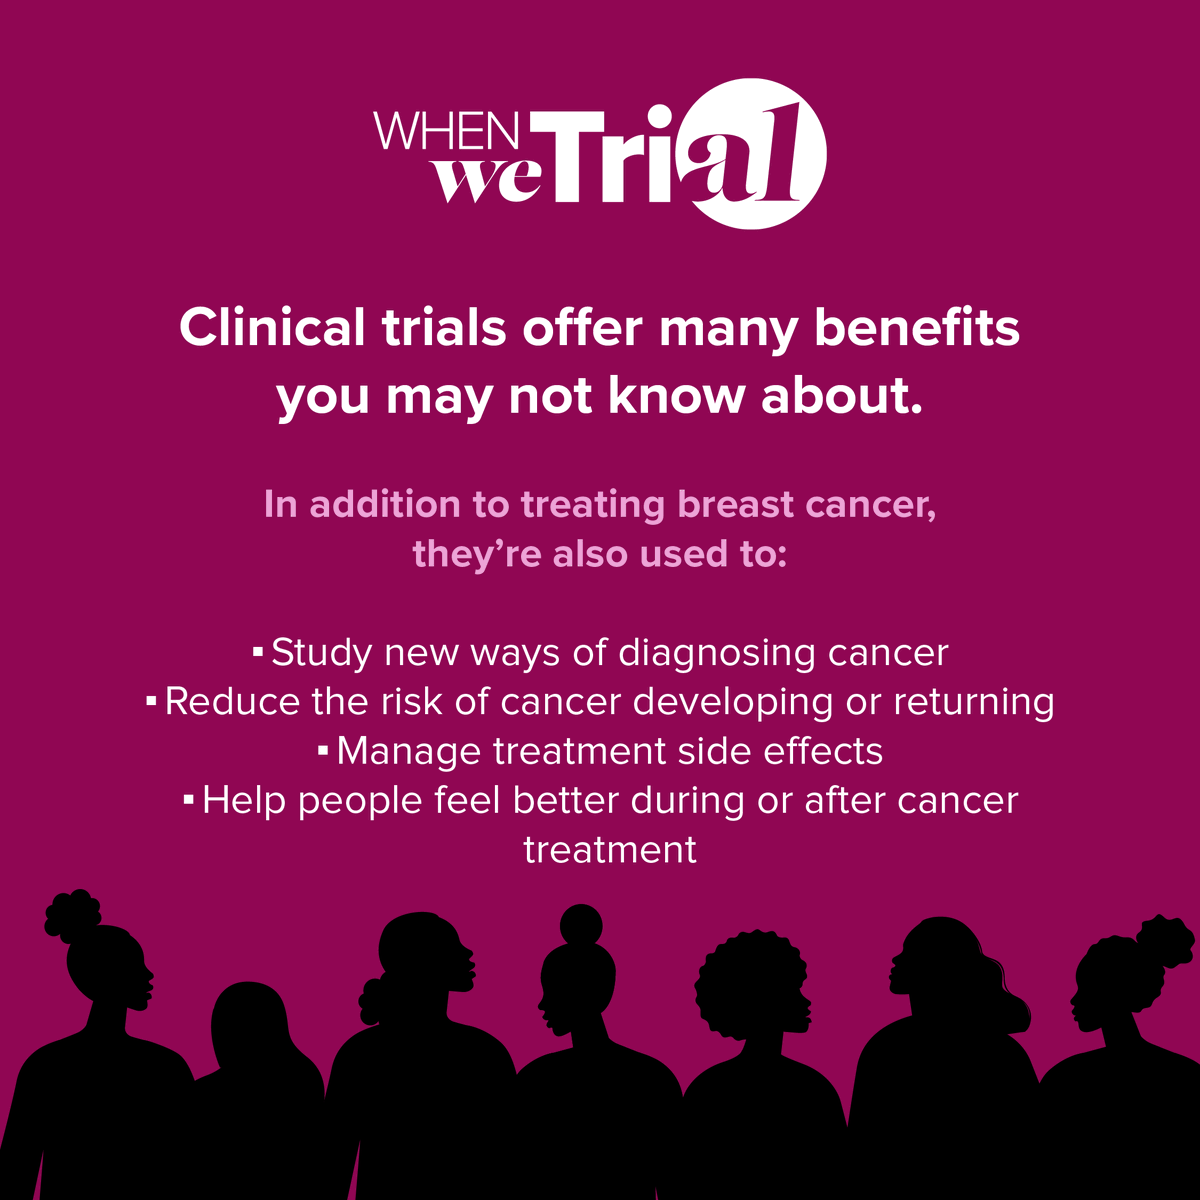 The main goal of a clinical trial is to treat breast cancer, but that’s not the only benefit of participating. Find out more about available clinical trials and finding the right fit at whenwetrial.org